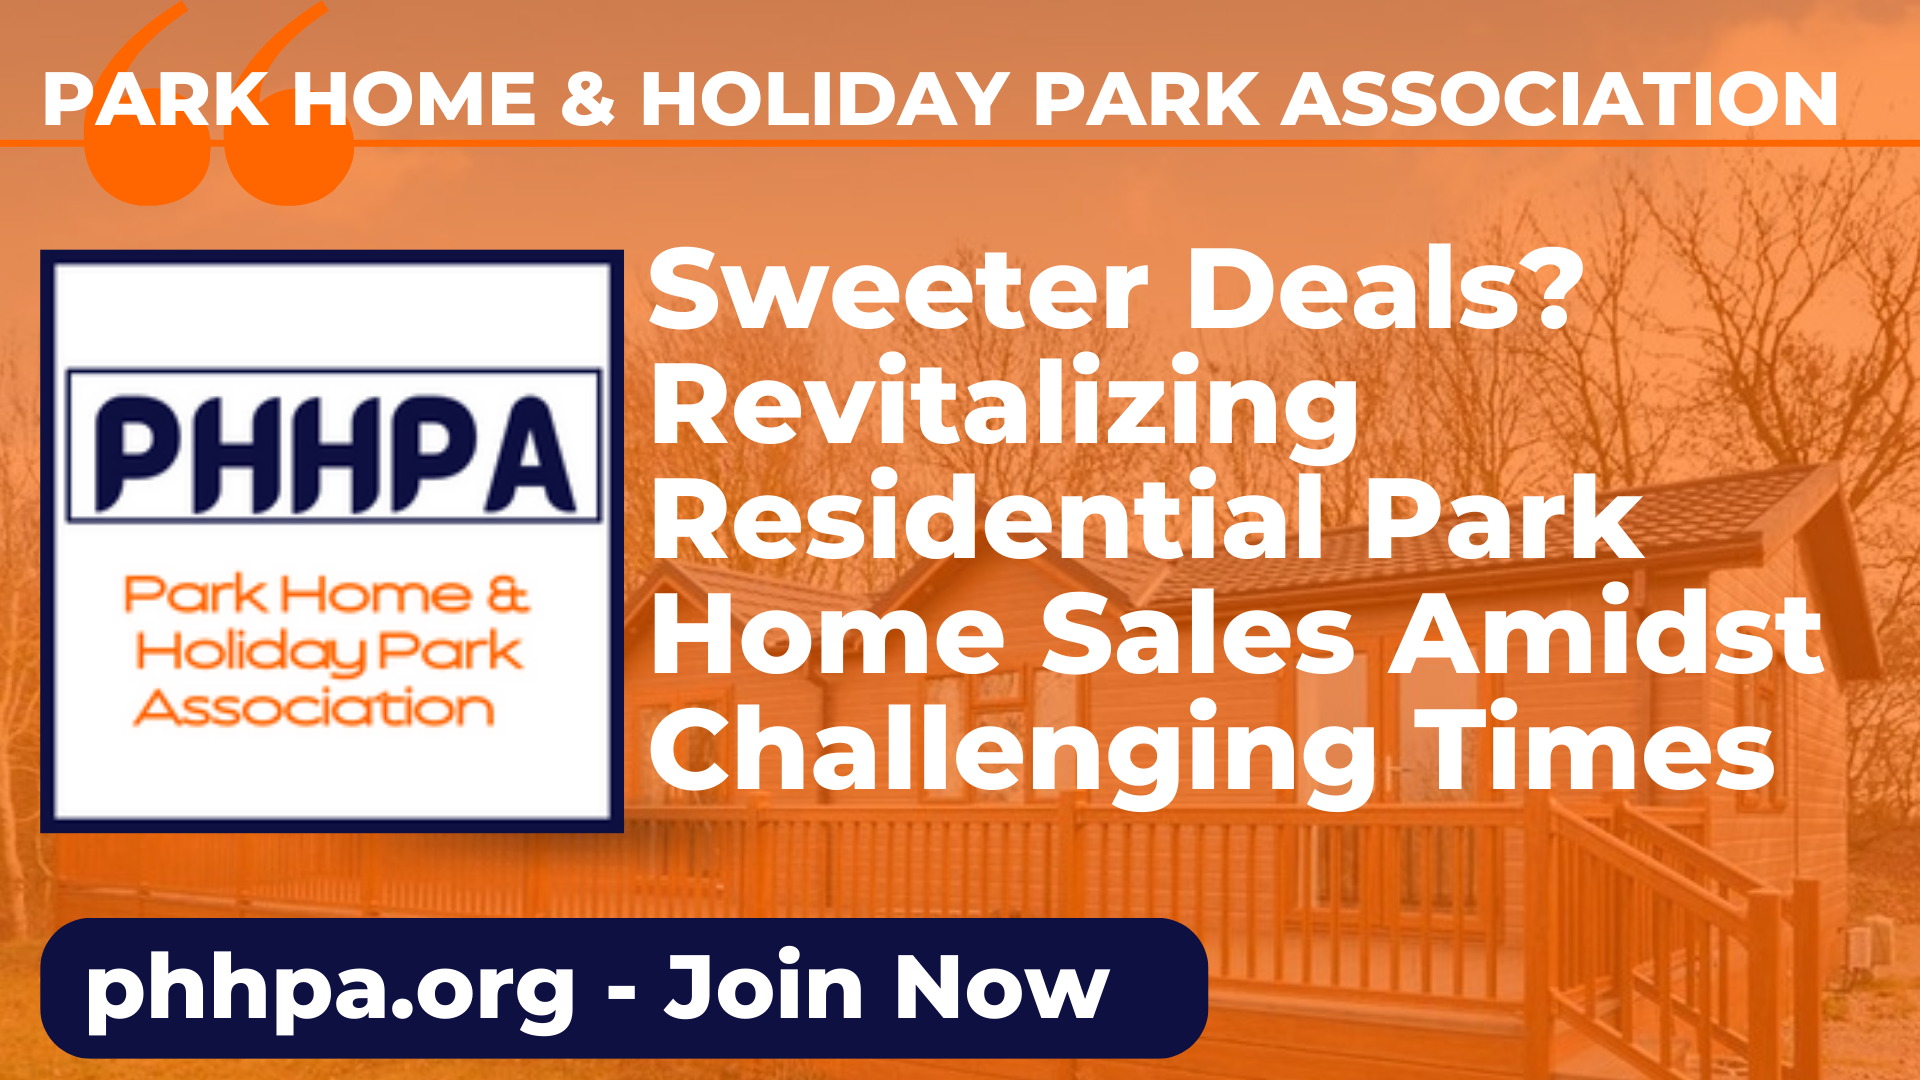 Title: Sweeter Deals: Revitalizing Residential Park Home Sales Amidst Challenging Times